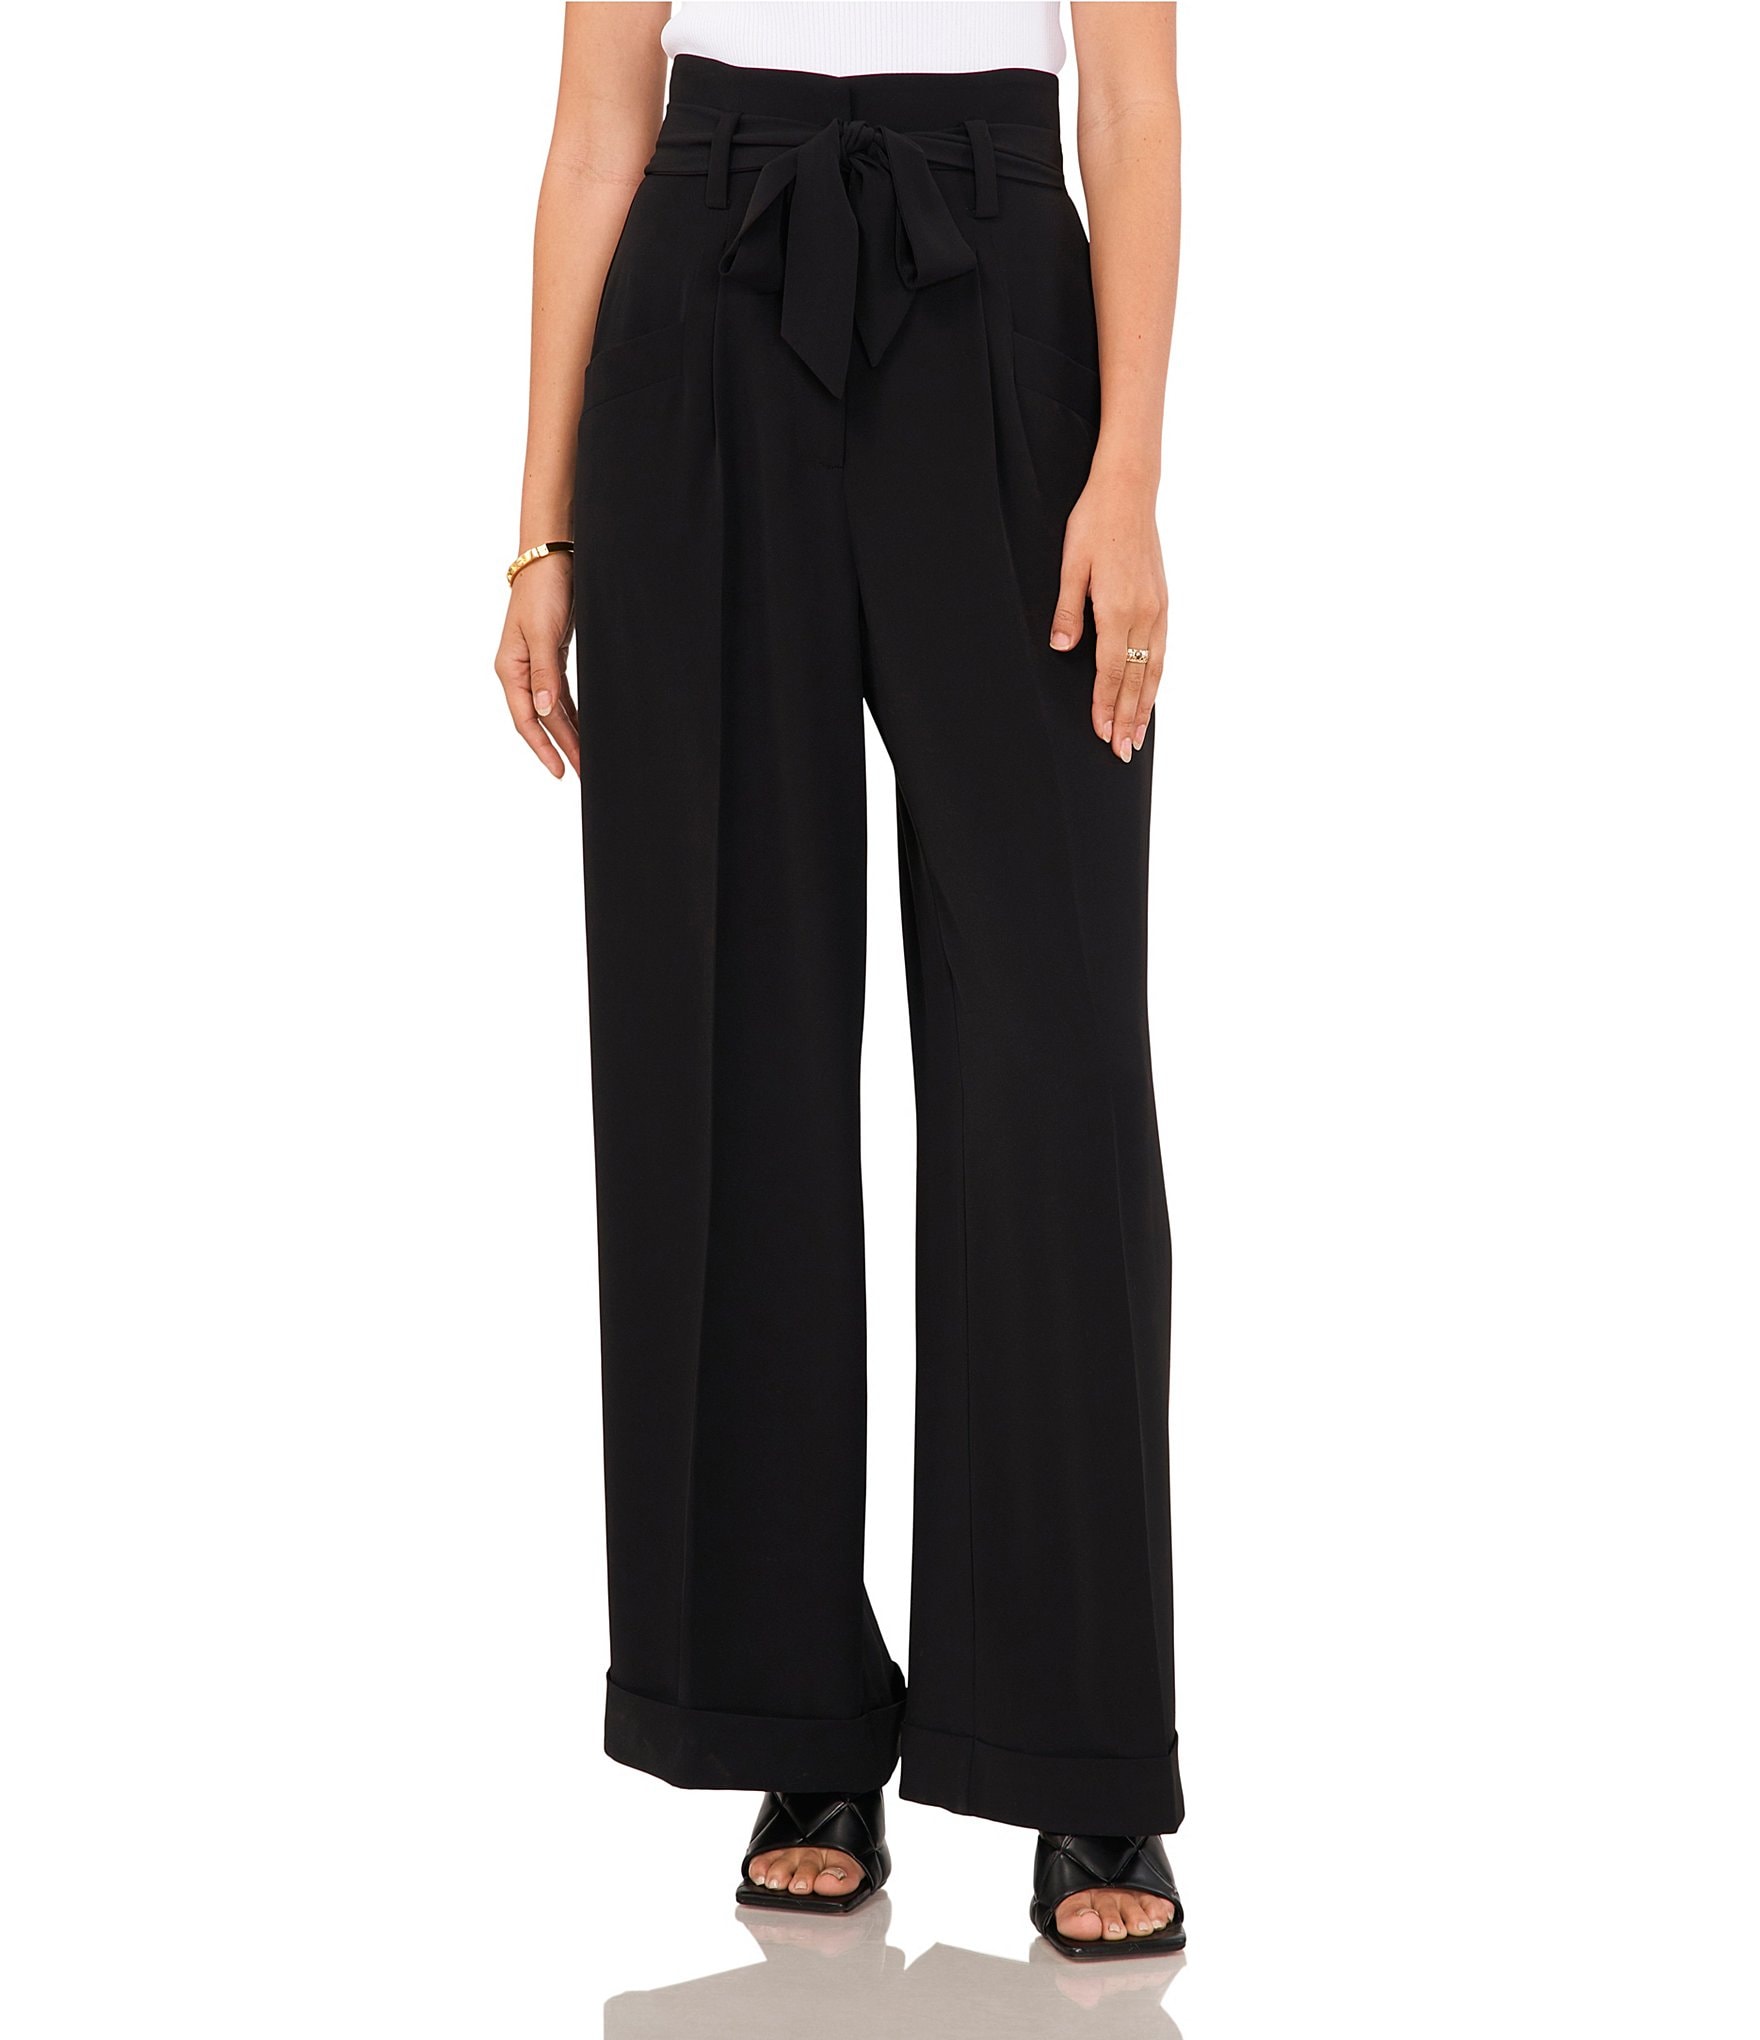 Ankle Tie Pants: Ankle Straps Are the Hottest Pants Trend for 2021